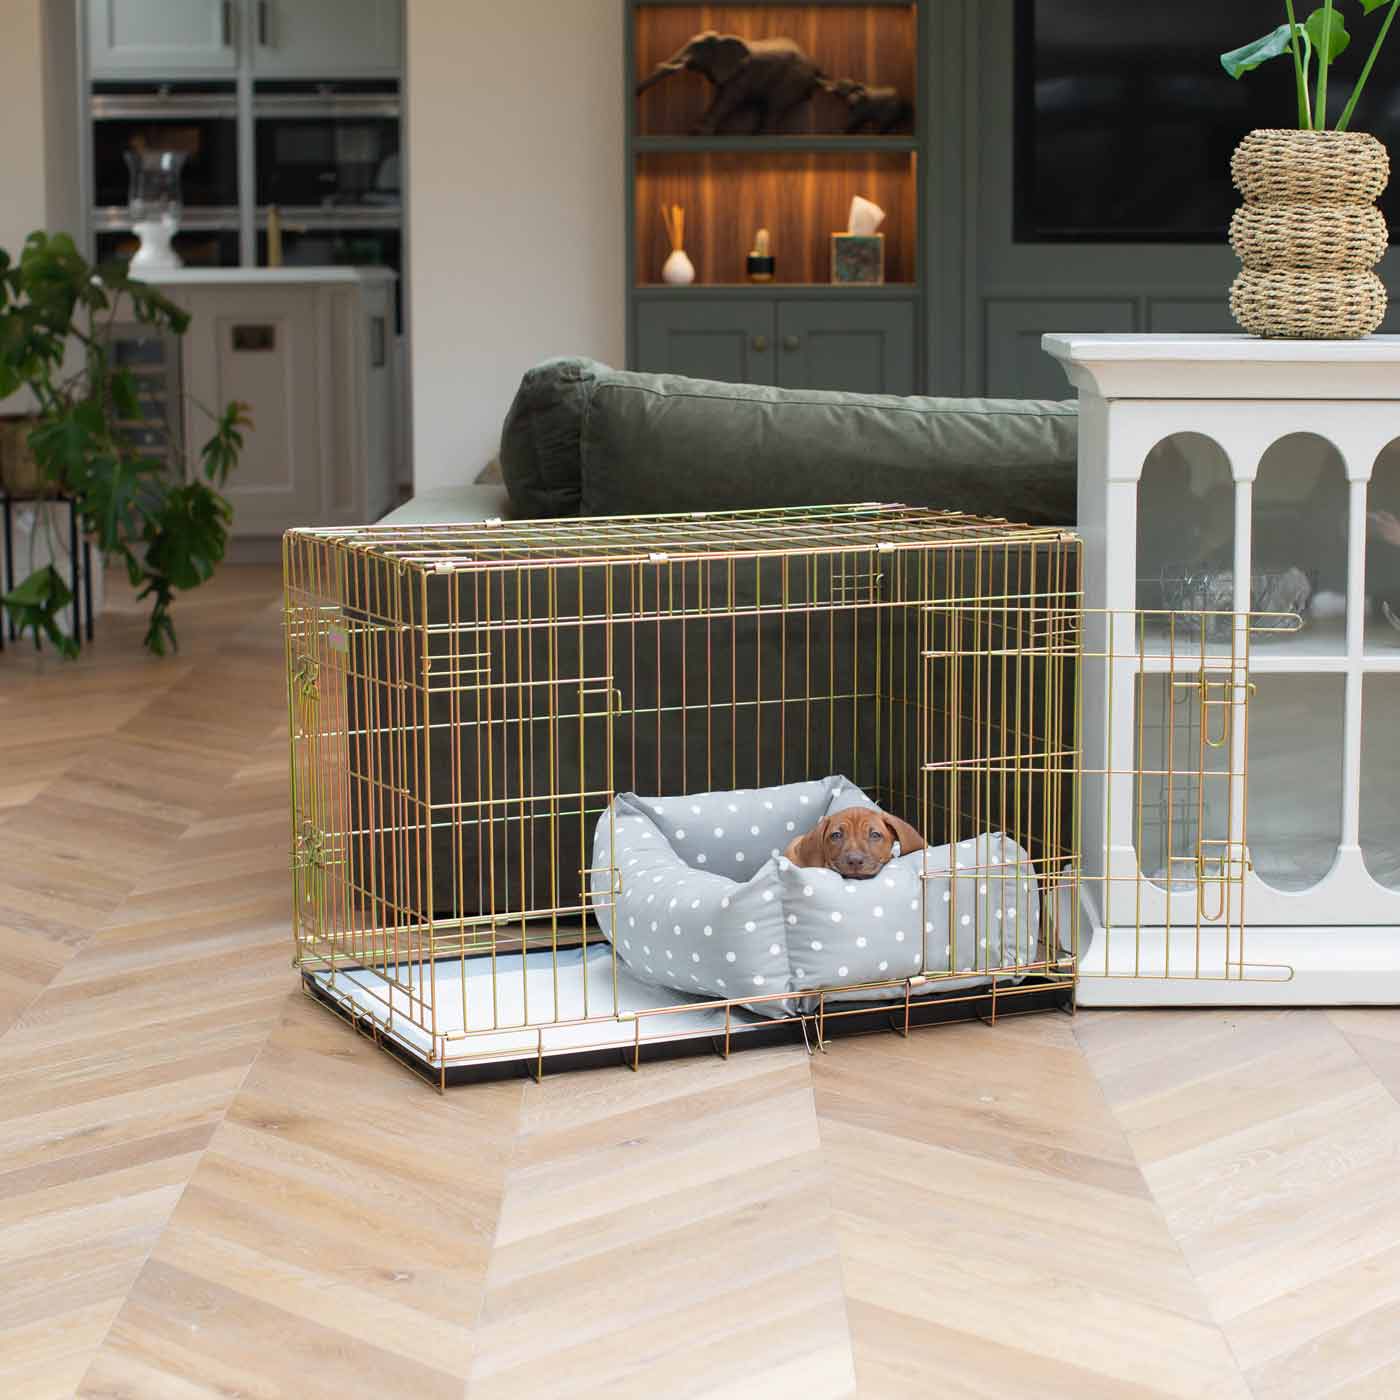 Luxury Gold Dog Cage With Cozy & Calm Puppy Cage Dog Bed, The Perfect Dog Crate For The Ultimate Naptime, Available Now at Lords & Labradors US